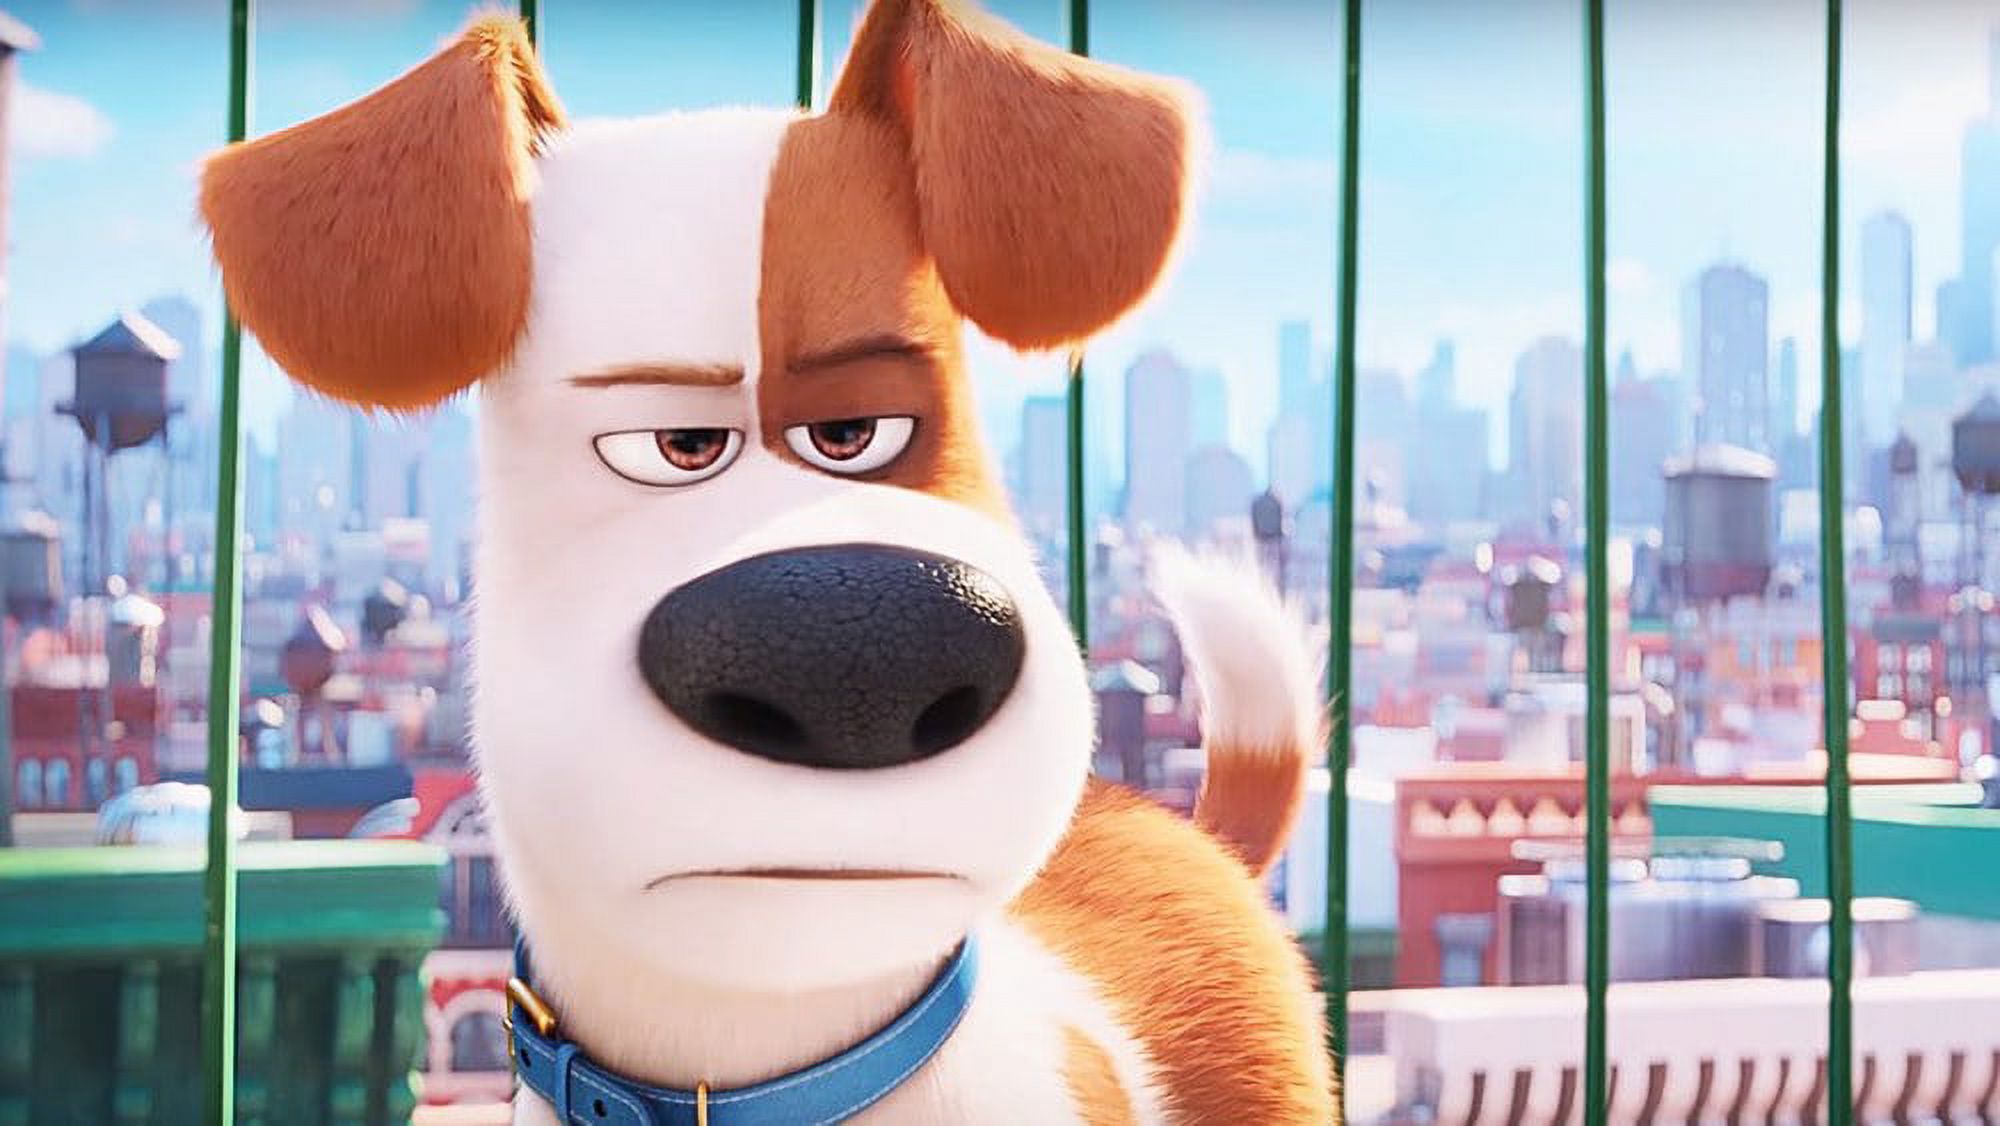 The Secret Life of Pets (Other) - image 5 of 5